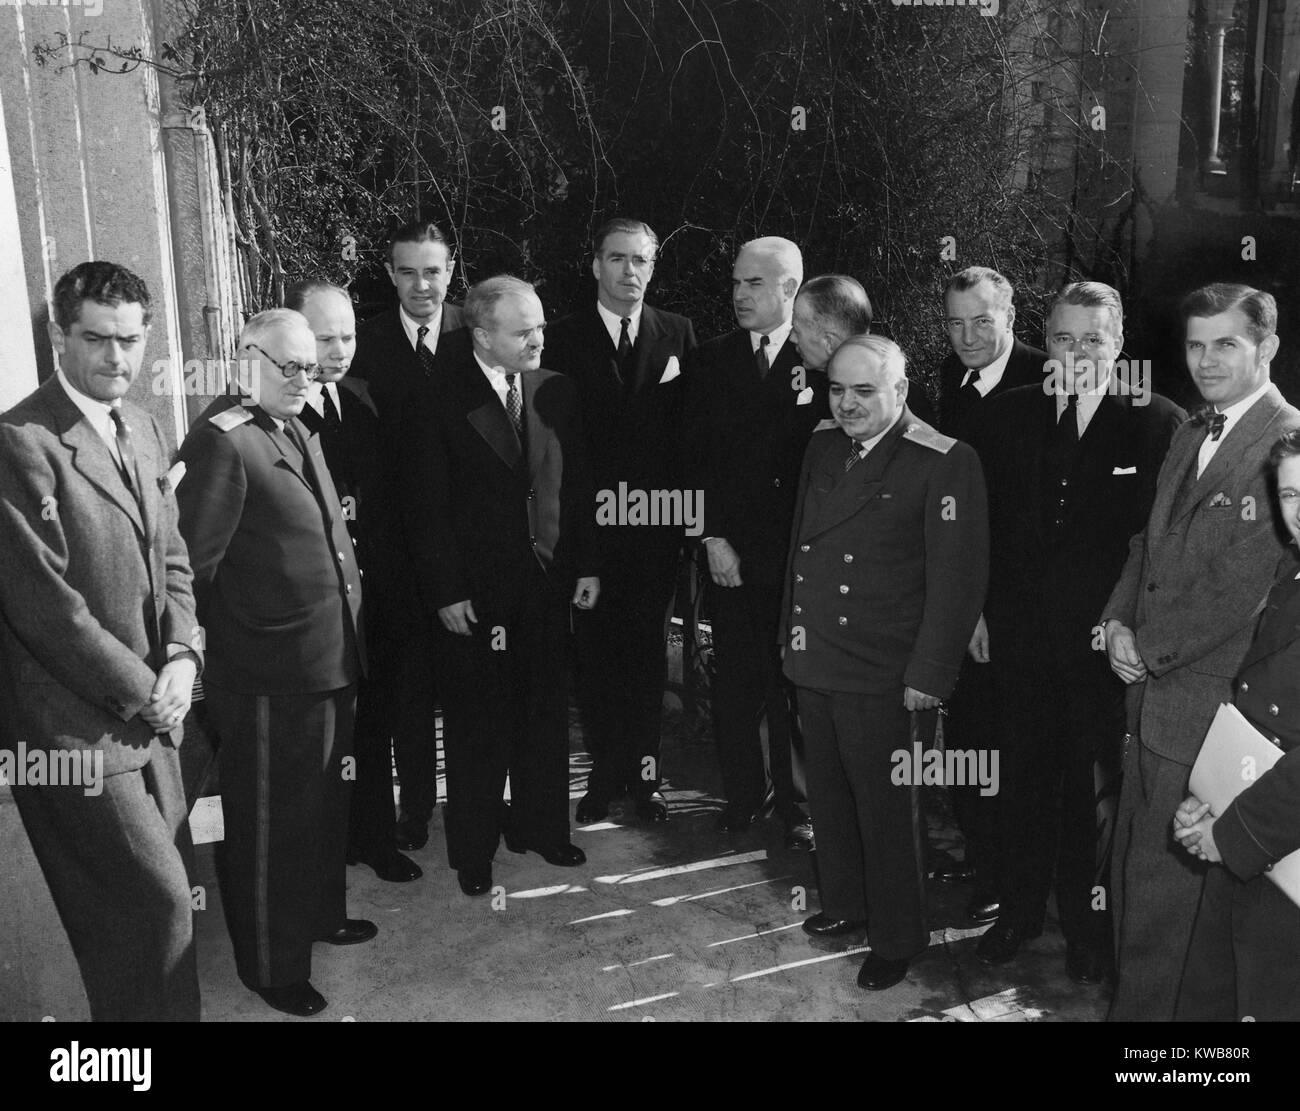 Foreign ministers and delegates to the Yalta Conference, Feb. 4–11, 1945. 2nd from left, Andrey Vishinsky; 4th from left, Averill Harriman; 5th from left, Vyacheslav Molotov; 6th from left, Anthony Eden; 7th from left, Edward Stettinius; 8th from left, Alexander Cadogan; and on far right, Alger Hiss. World War 2. (BSLOC 2014 8 201) Stock Photo